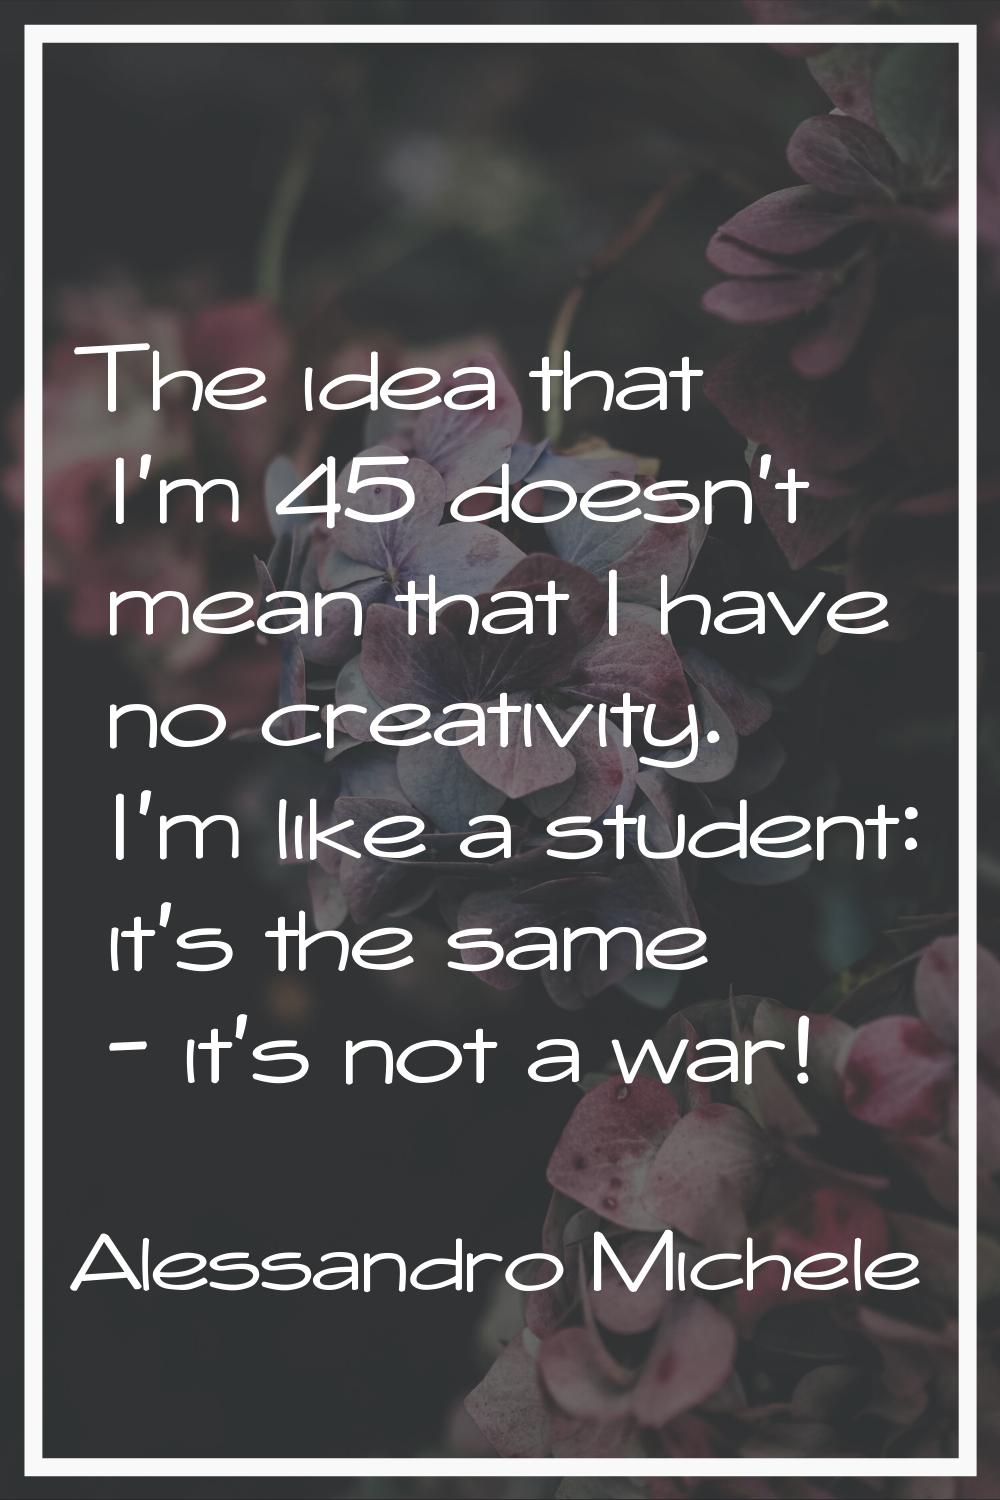 The idea that I'm 45 doesn't mean that I have no creativity. I'm like a student: it's the same - it